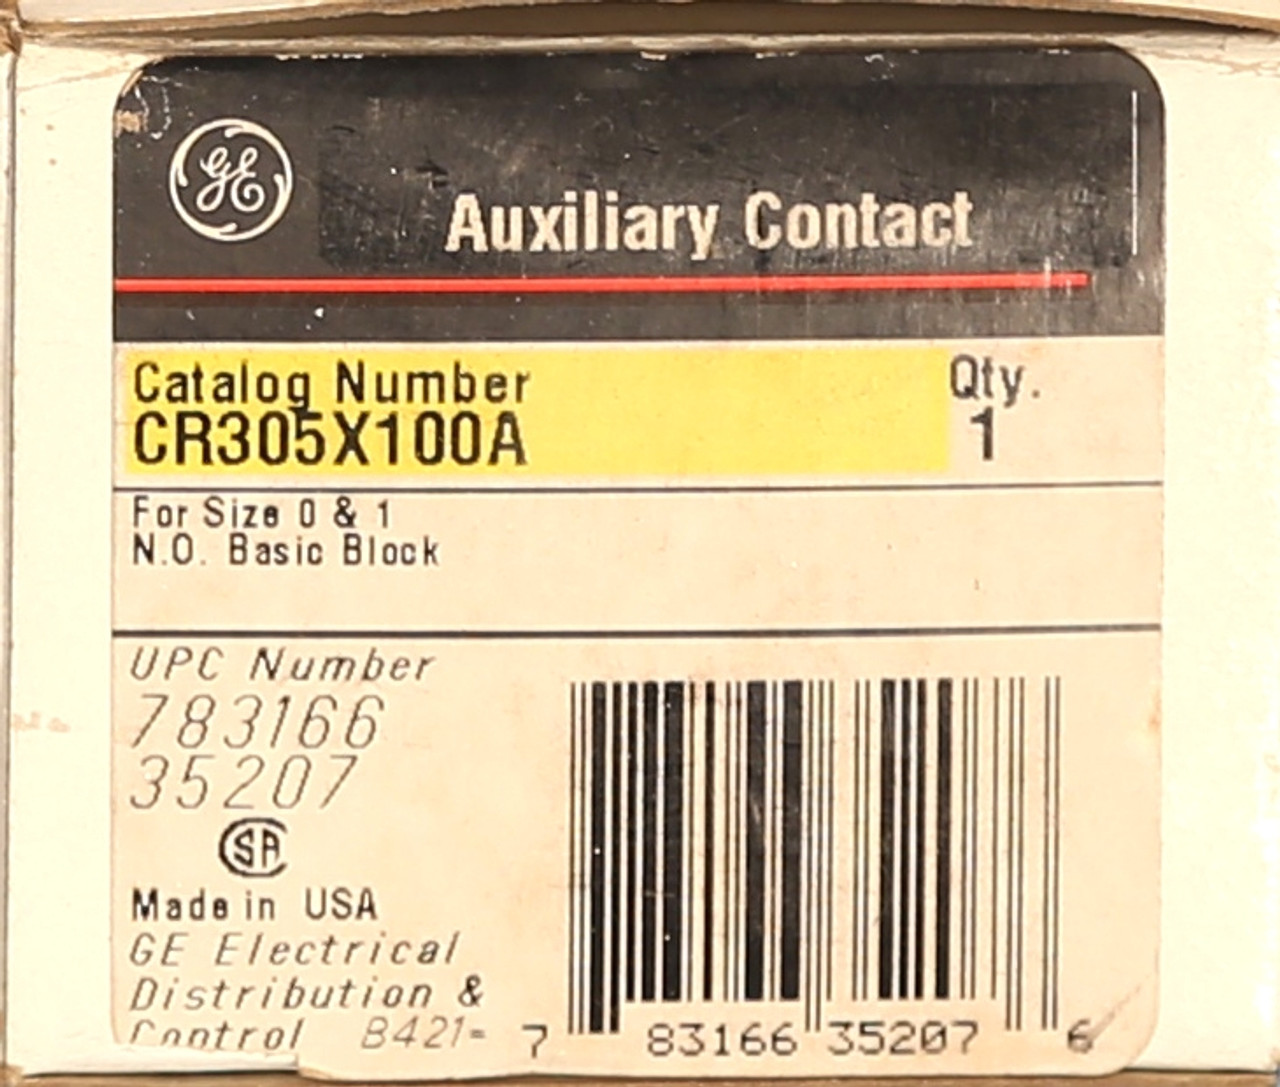 CR305X100A
 Auxiliary Contact